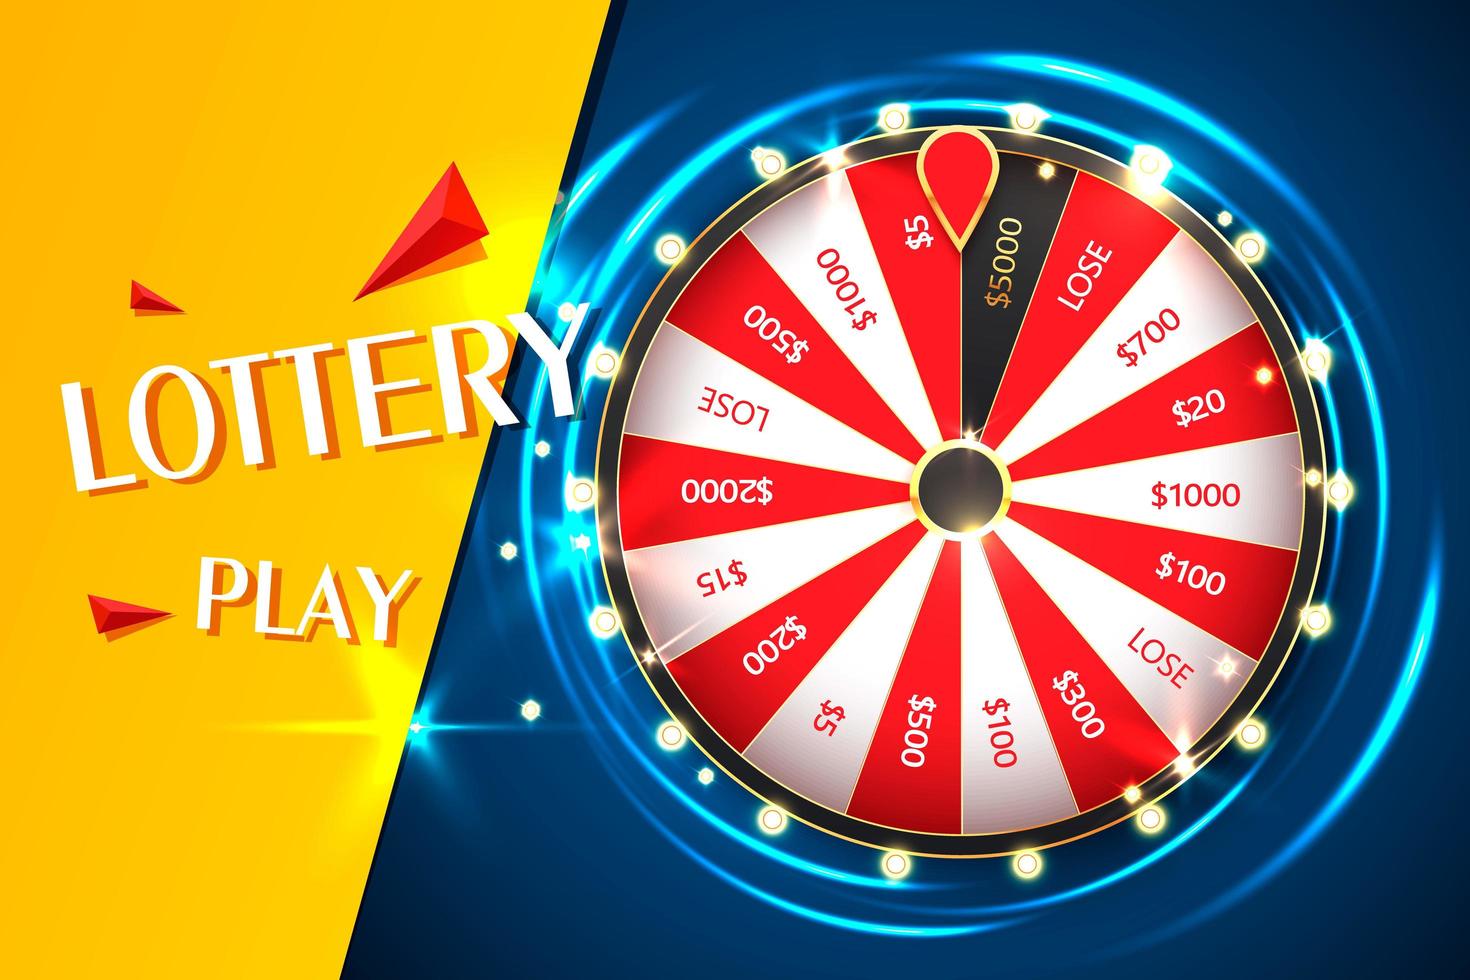 Casino spinning fortune wheel vector banner template